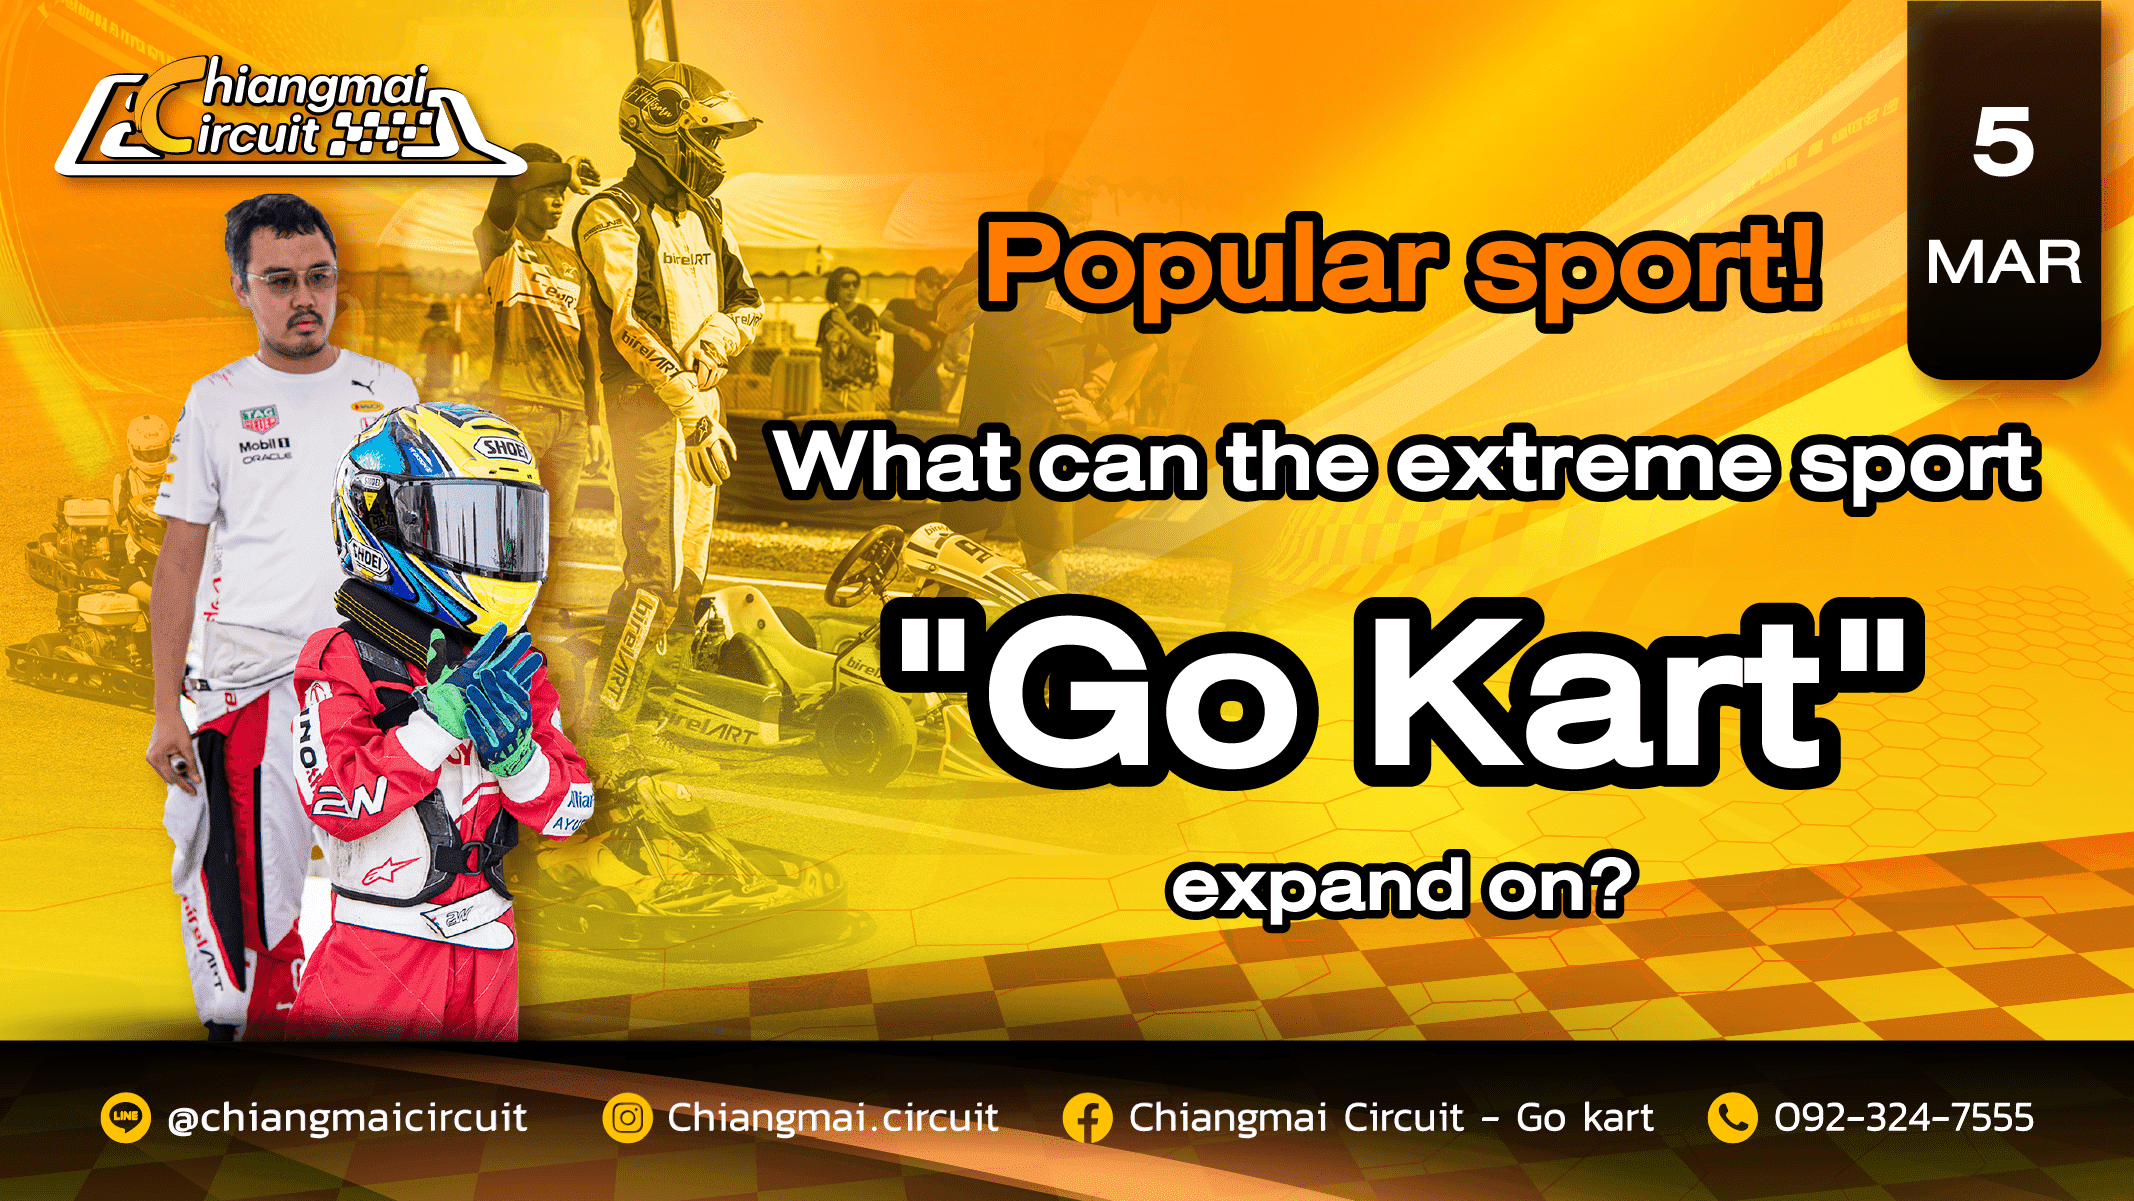 Popular sport! What can the extreme sport "Go Kart" expand on?